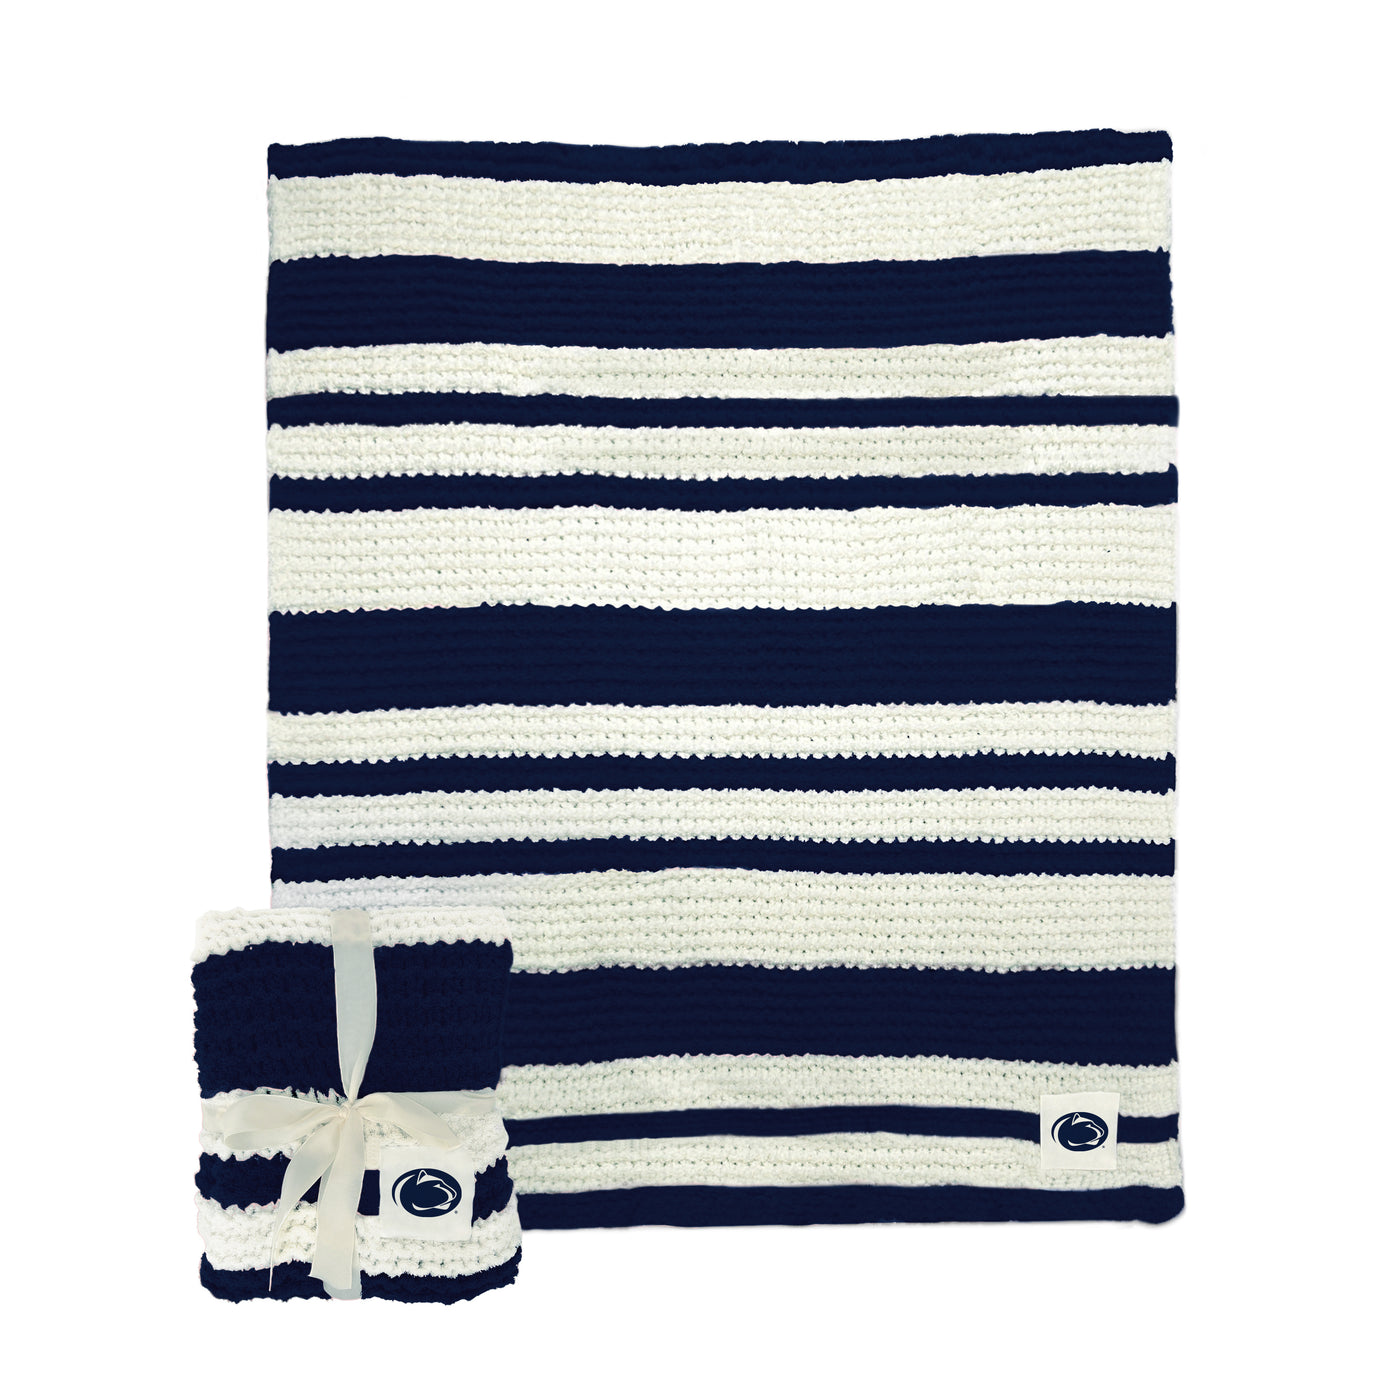 Penn State Cable Knit Throw 50x60